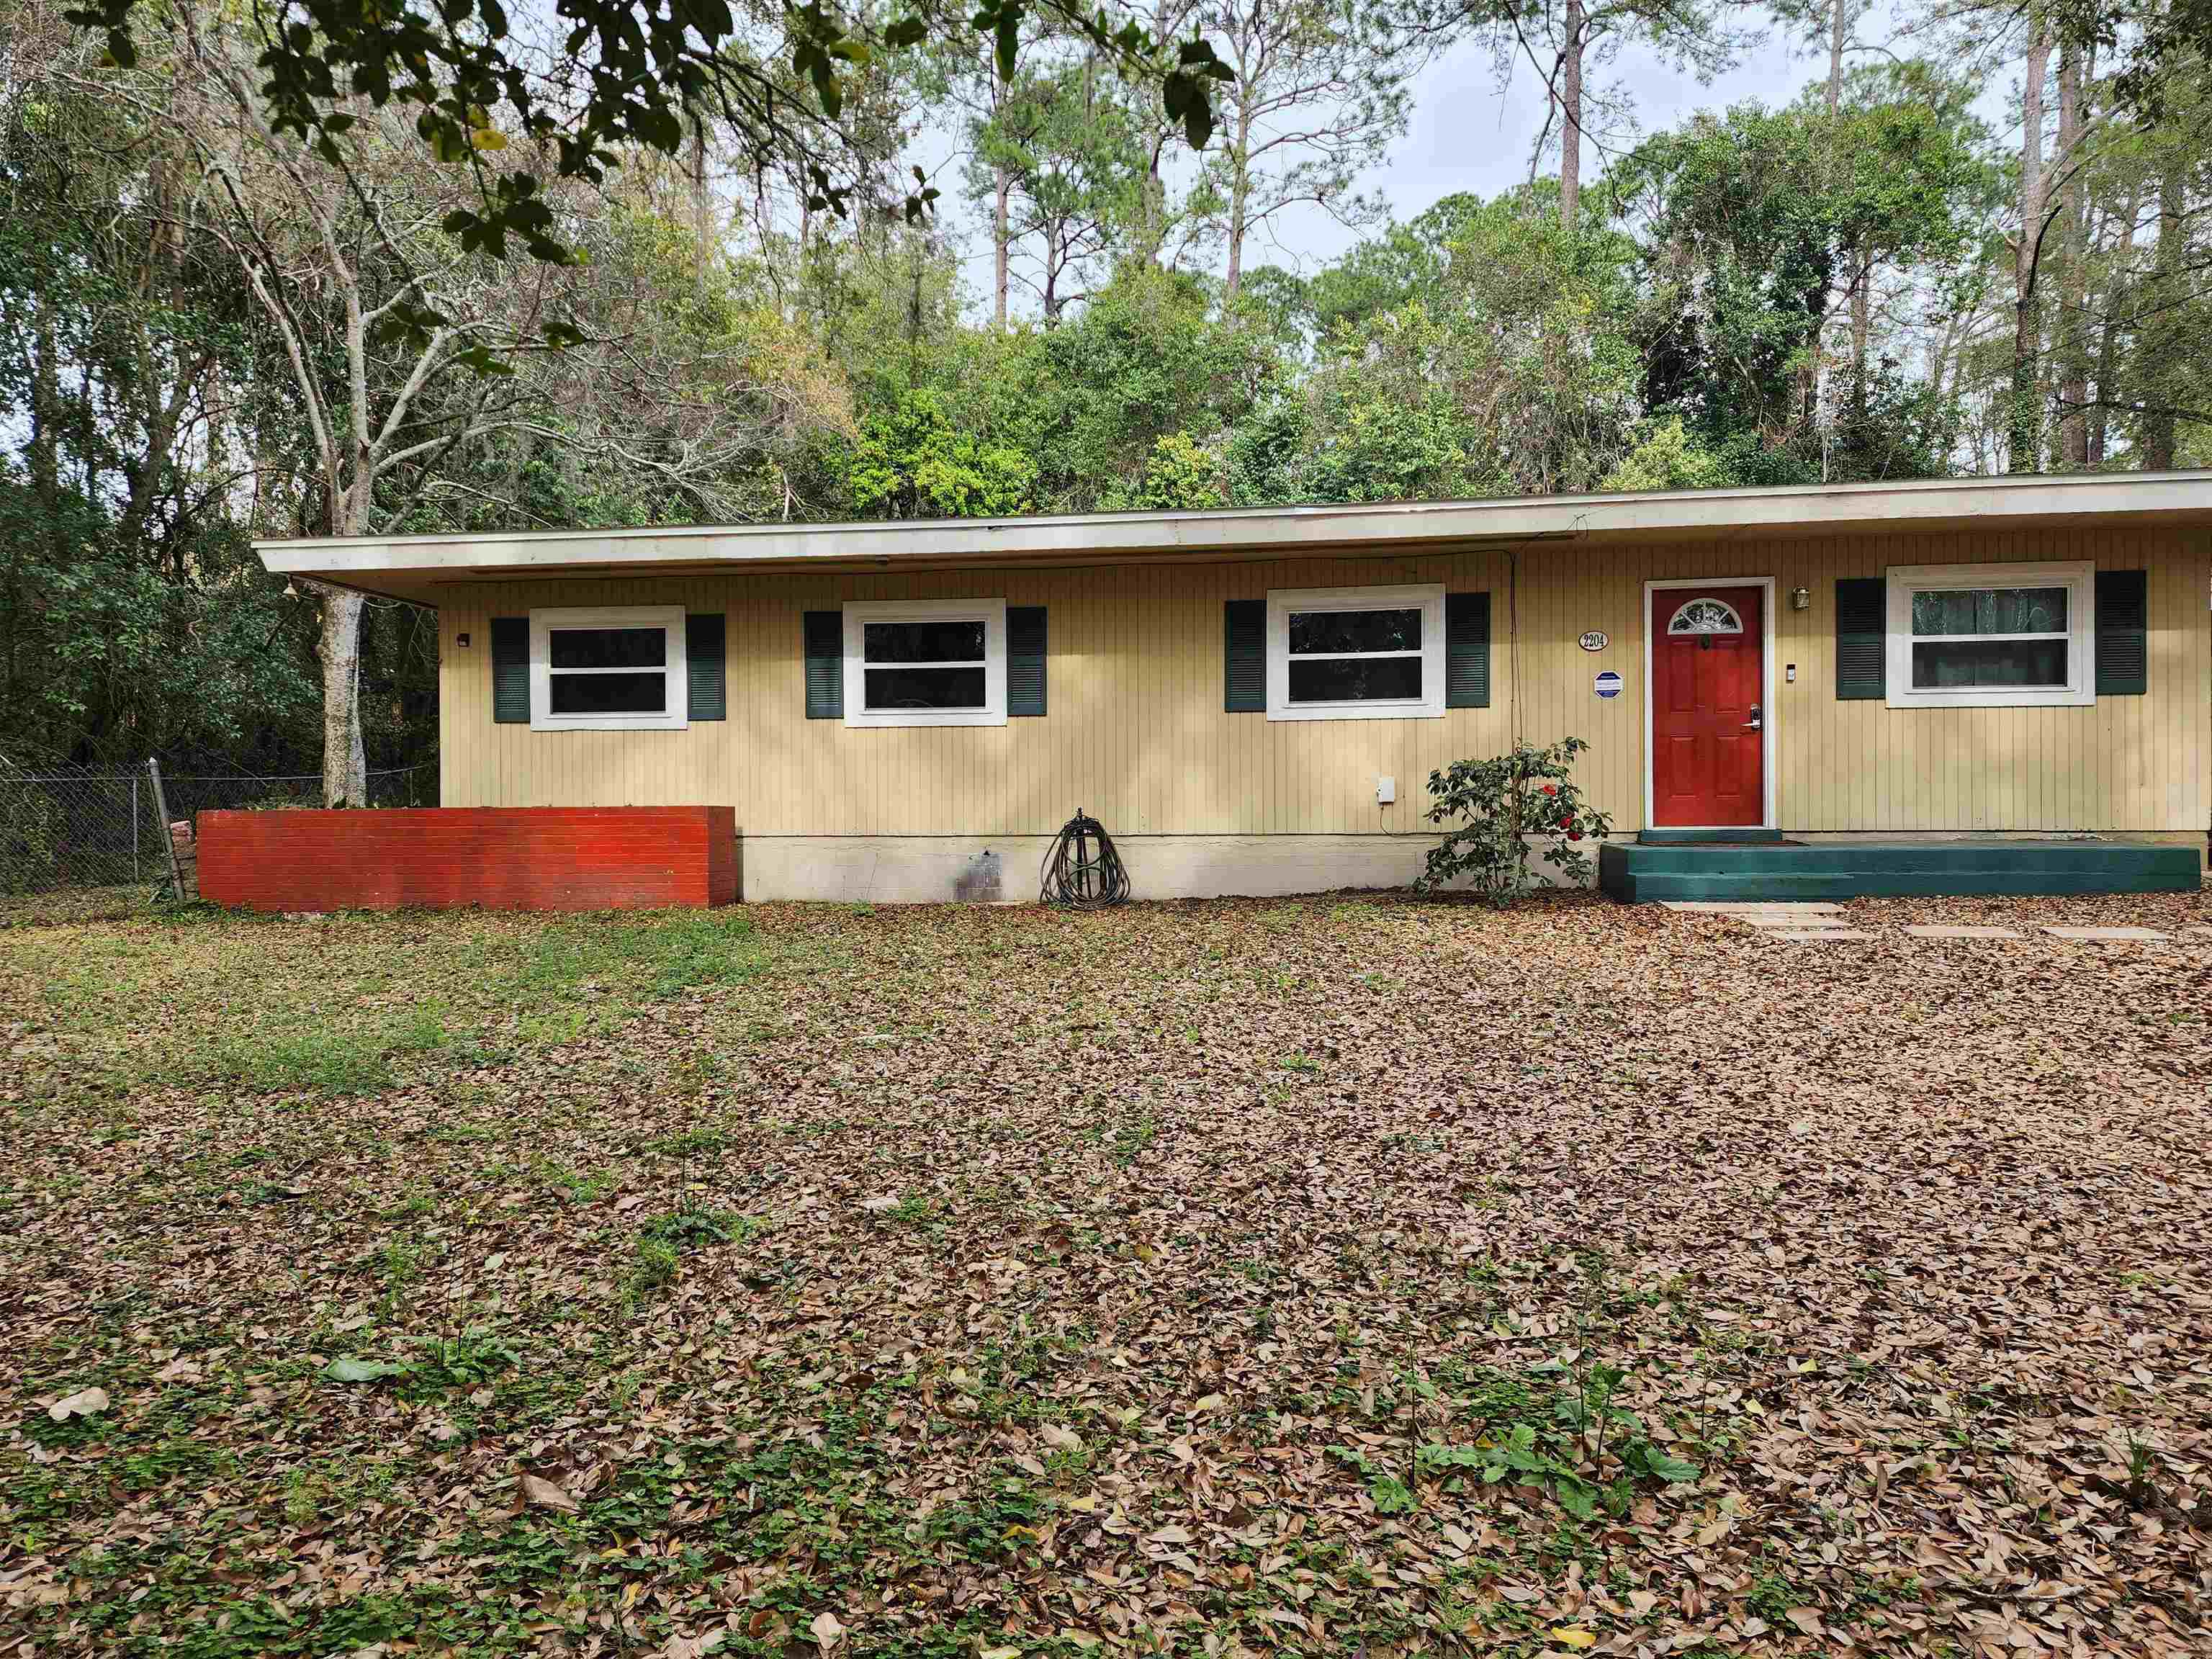 2204 Mission Road,TALLAHASSEE,Florida 32304,4 Bedrooms Bedrooms,2 BathroomsBathrooms,Detached single family,2204 Mission Road,369717